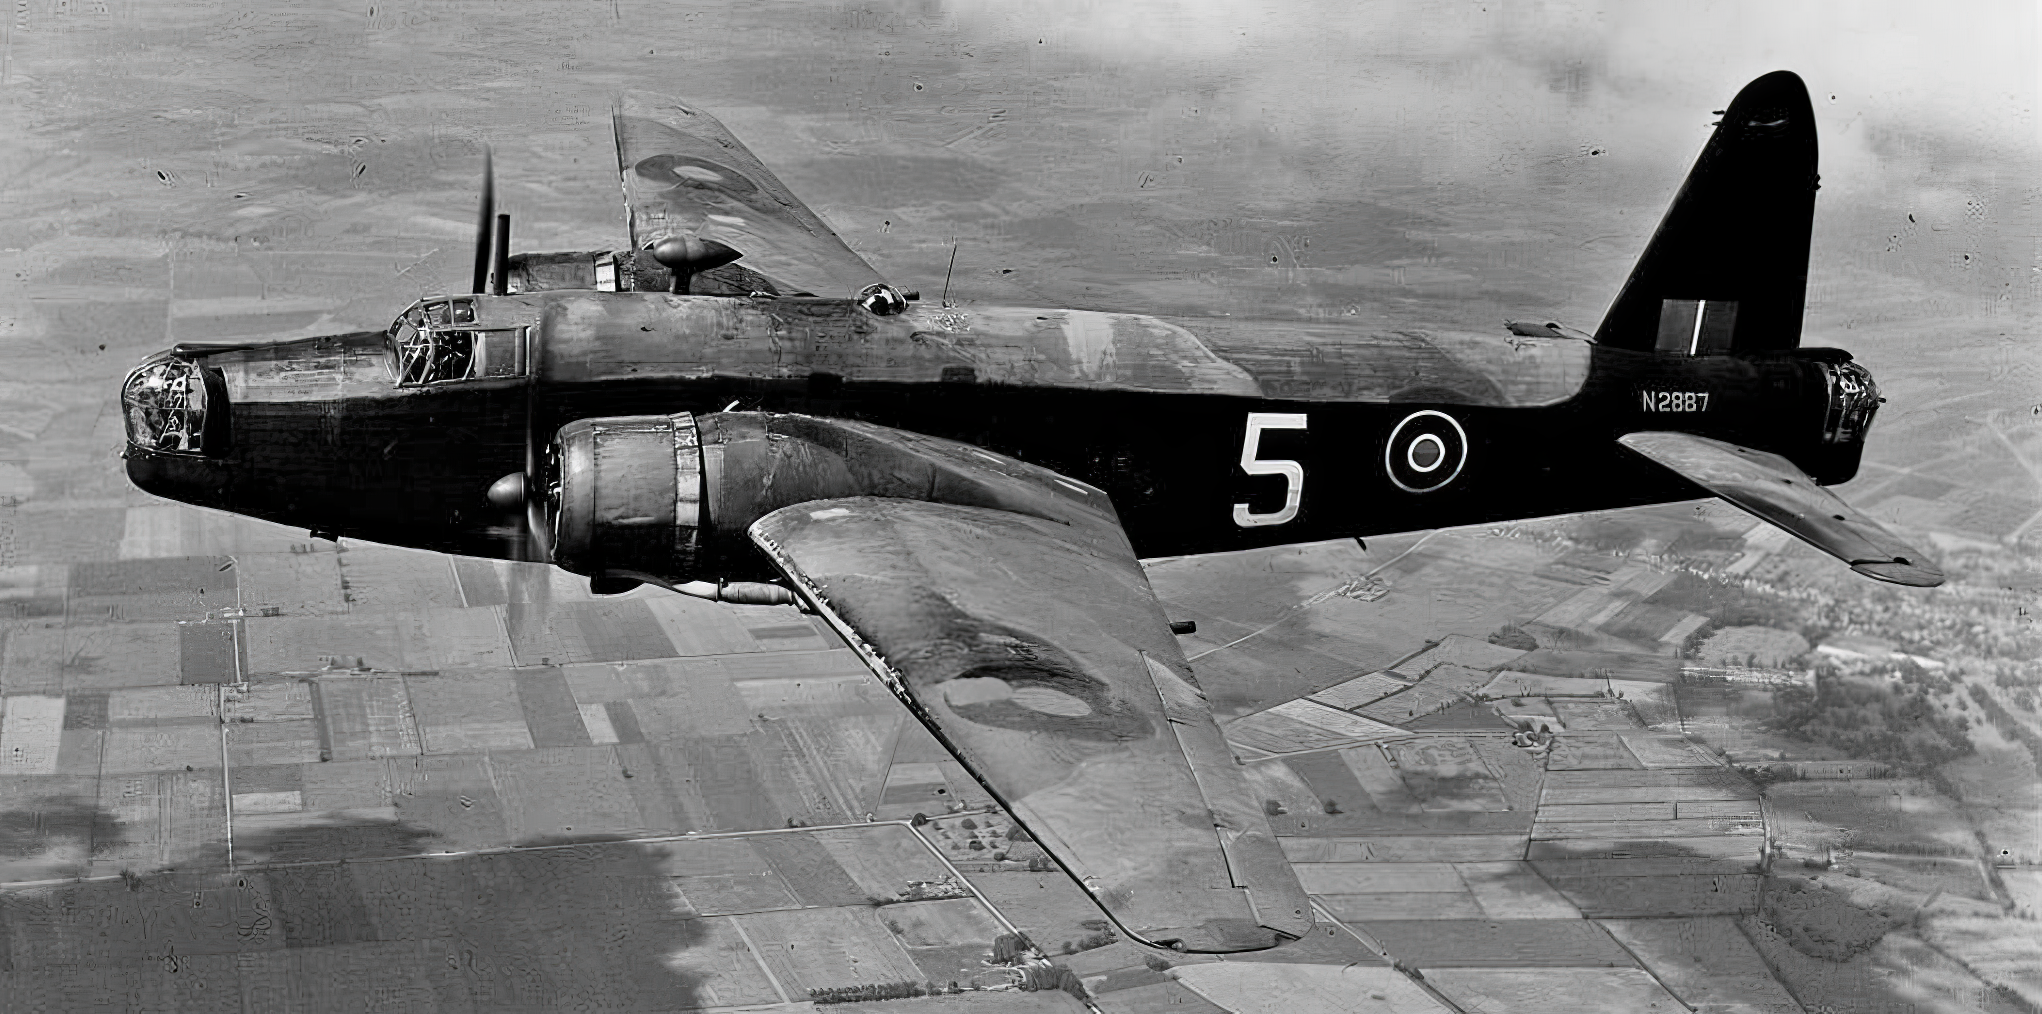  "Wellington Mk.IA (N2887) of the CGS (Central Gunnery School) based at Sutton Bridge flying south-east of Chatteris, 24th June, 1943